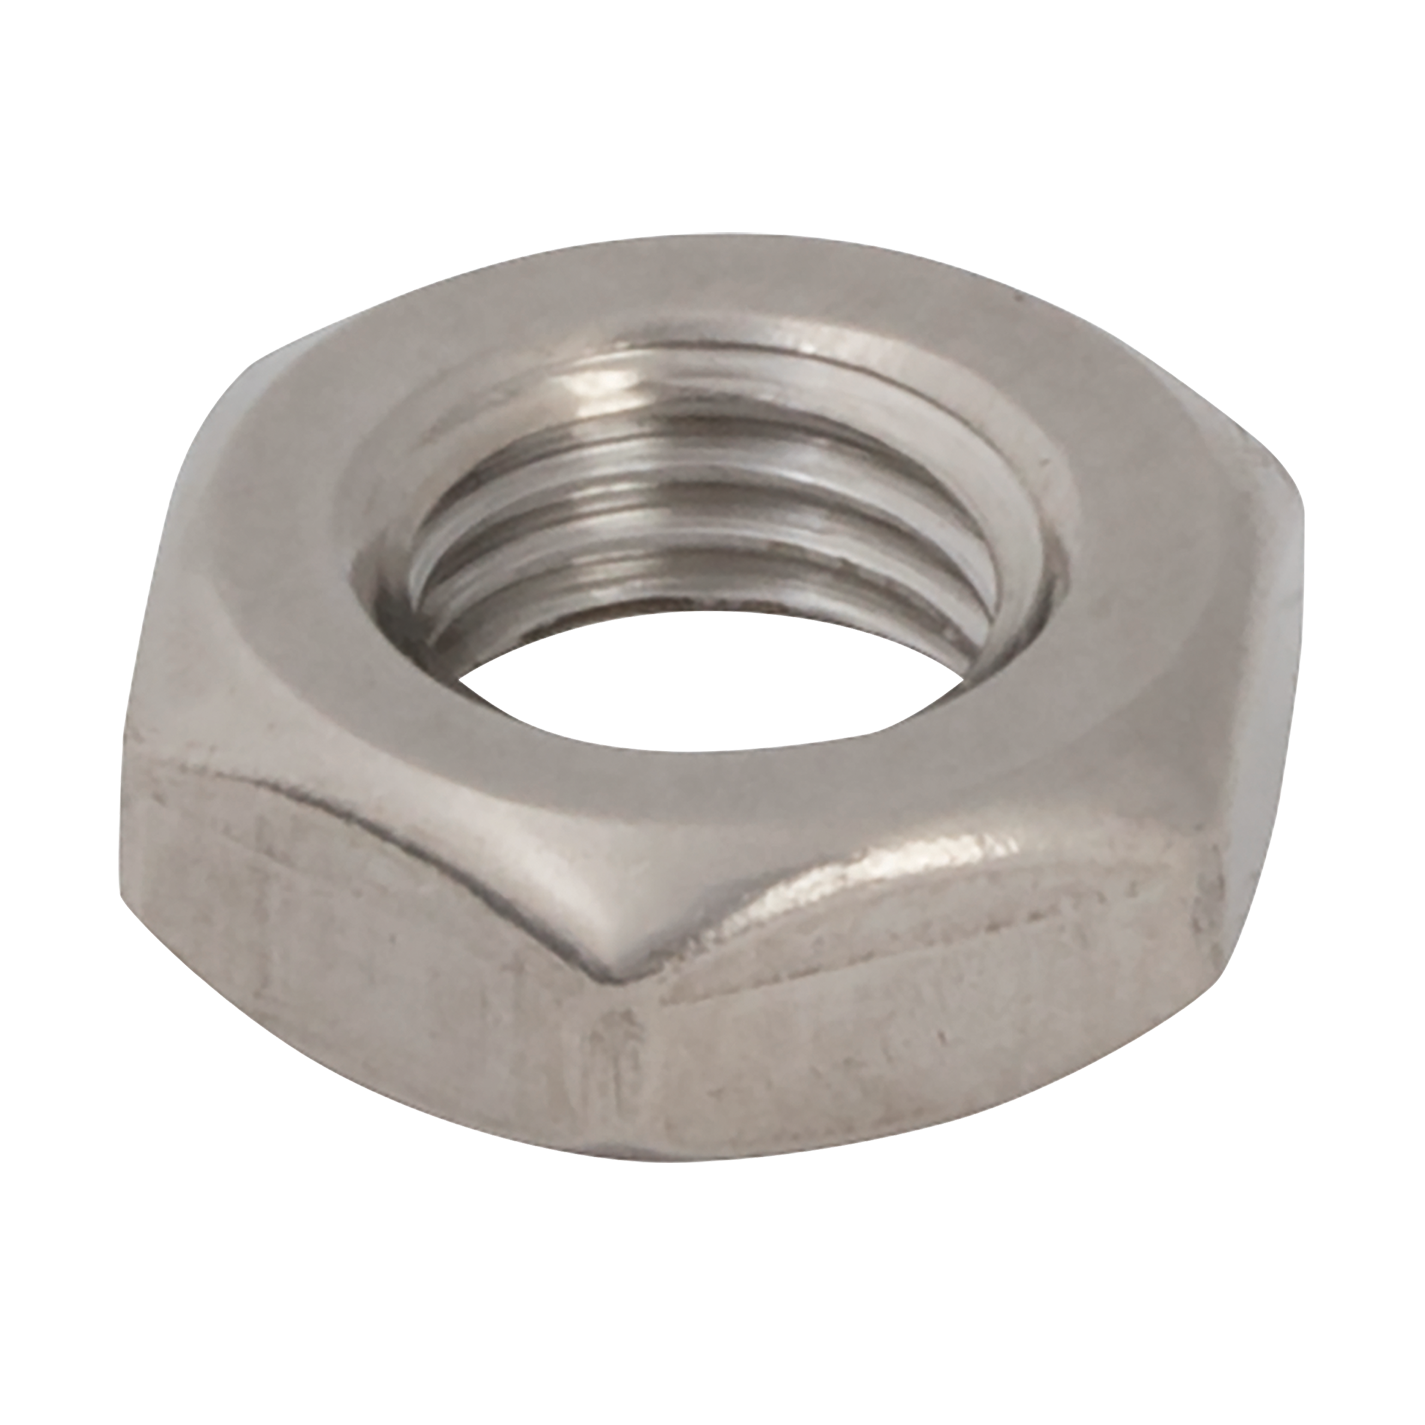 S/S ROD NUT M8X1 FOR 20MM DIA. CYLINDERS